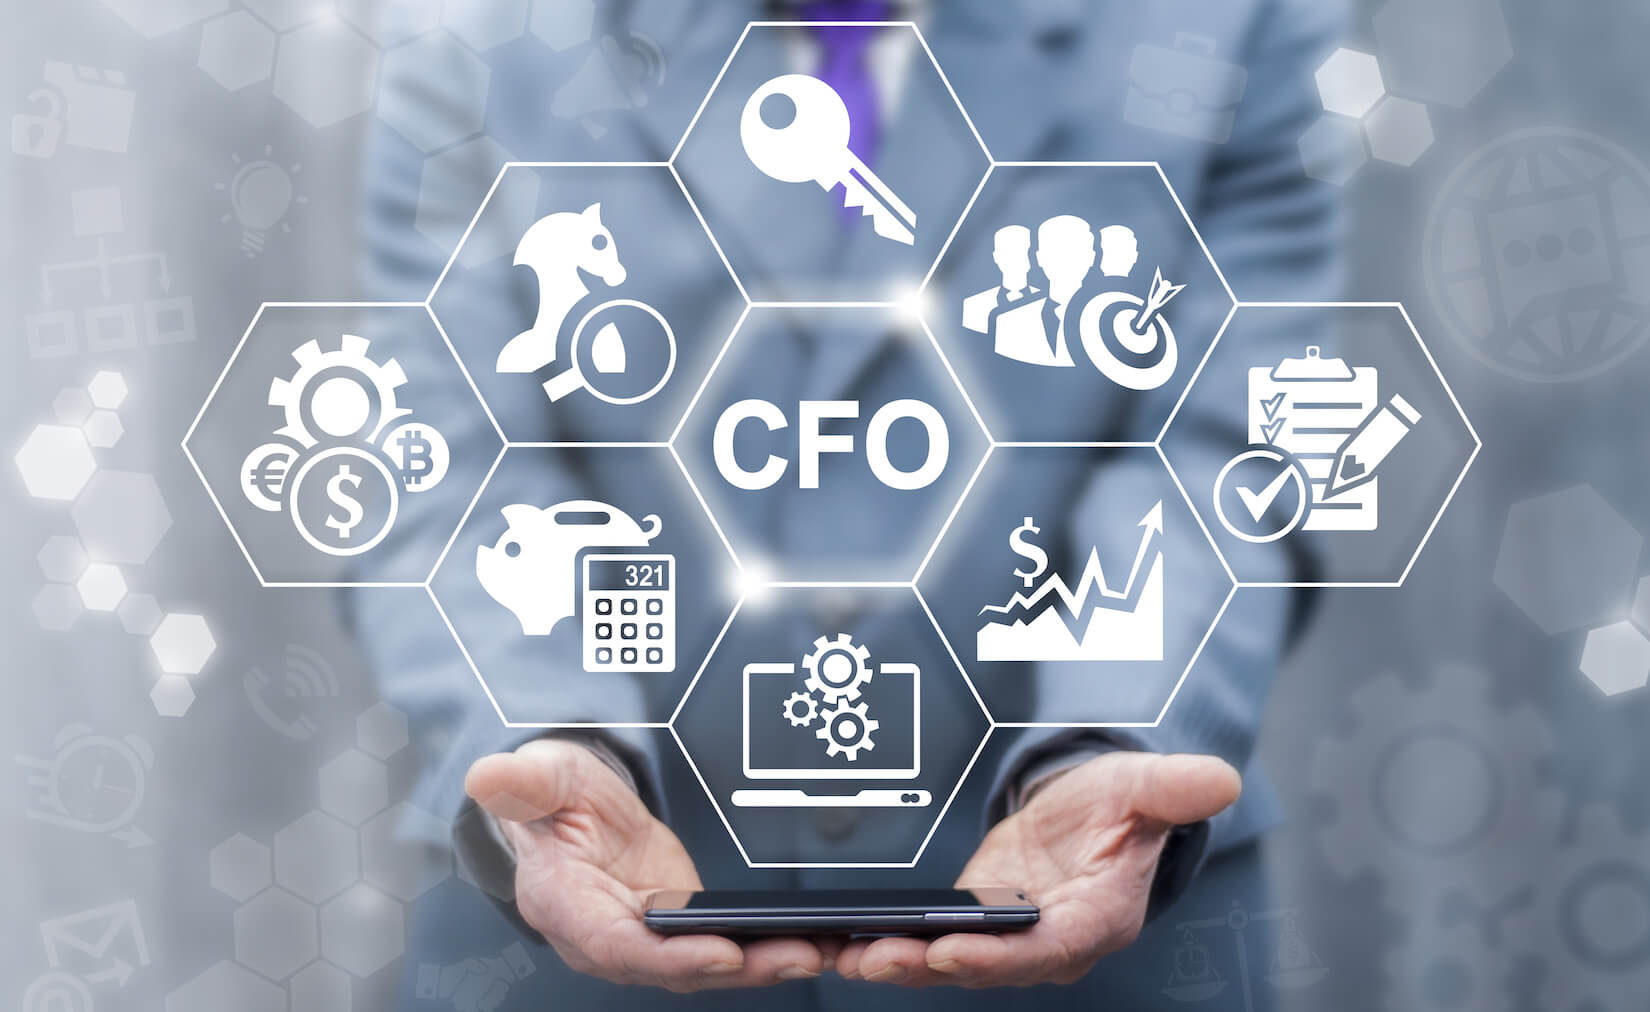 Maximize Your Agency’s Potential with Outsourced CFO Services